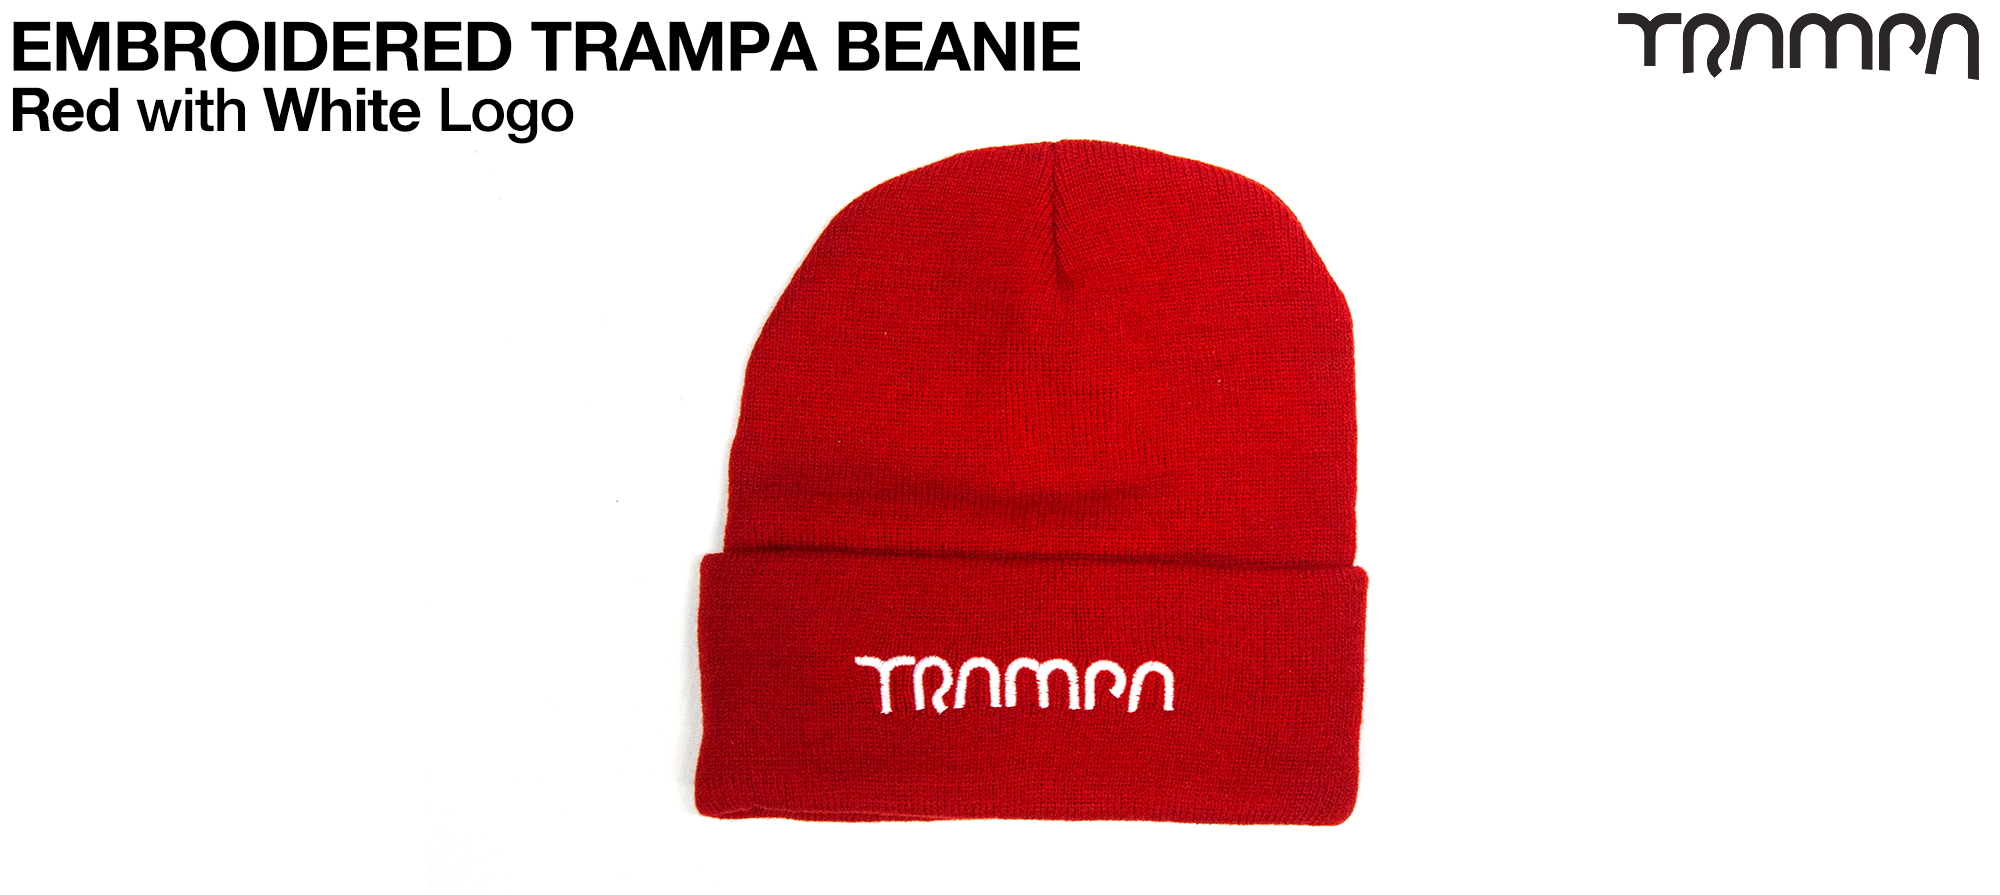 RED Woolly Hat with WHITE/SILVER TRAMPA Embroidery - Double thick turn over for extra warmth